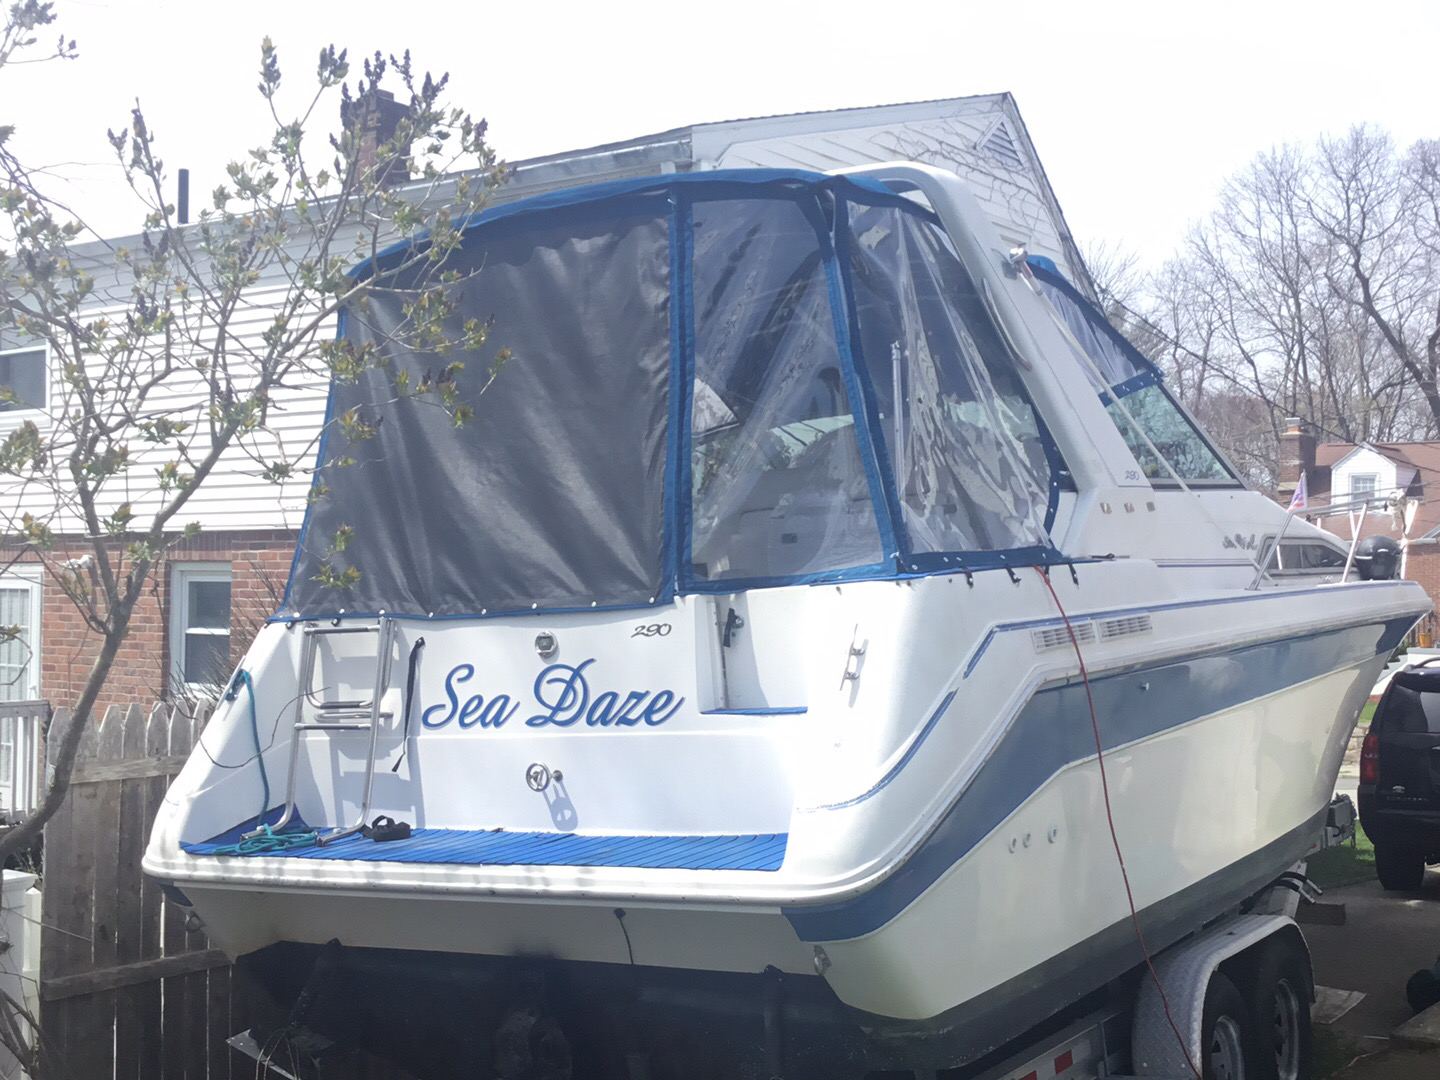 1993 30 foot Sea Ray Cabin CR Power boat for sale in New London, CT - image 5 